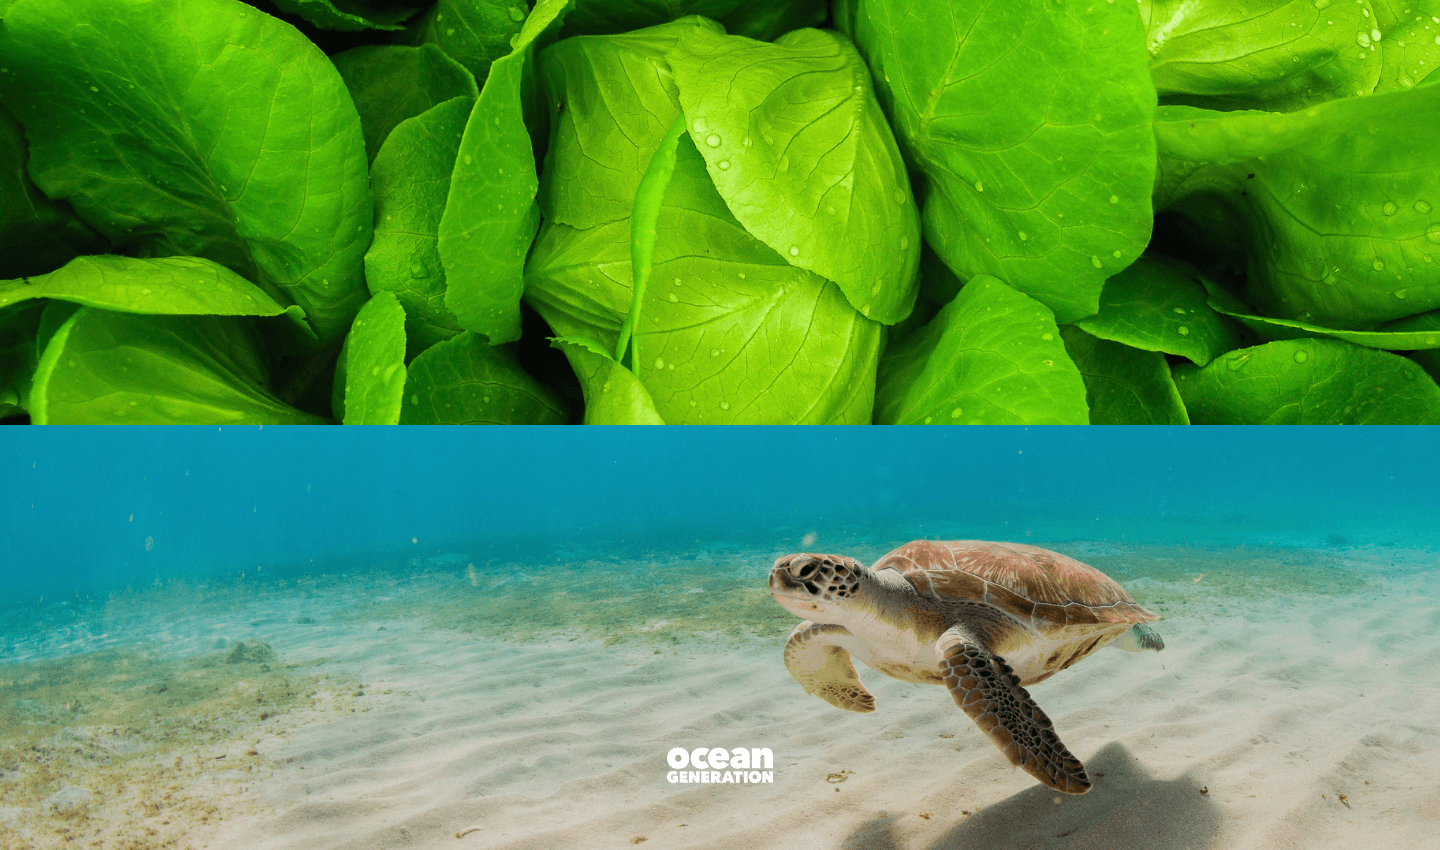 Is locally sourced food better for the planet? Ocean Generation weighs in. The top half of this image shows lush lettuce with water droplets and the bottom shows a sea turtle swimming in the Ocean among some seagrass.